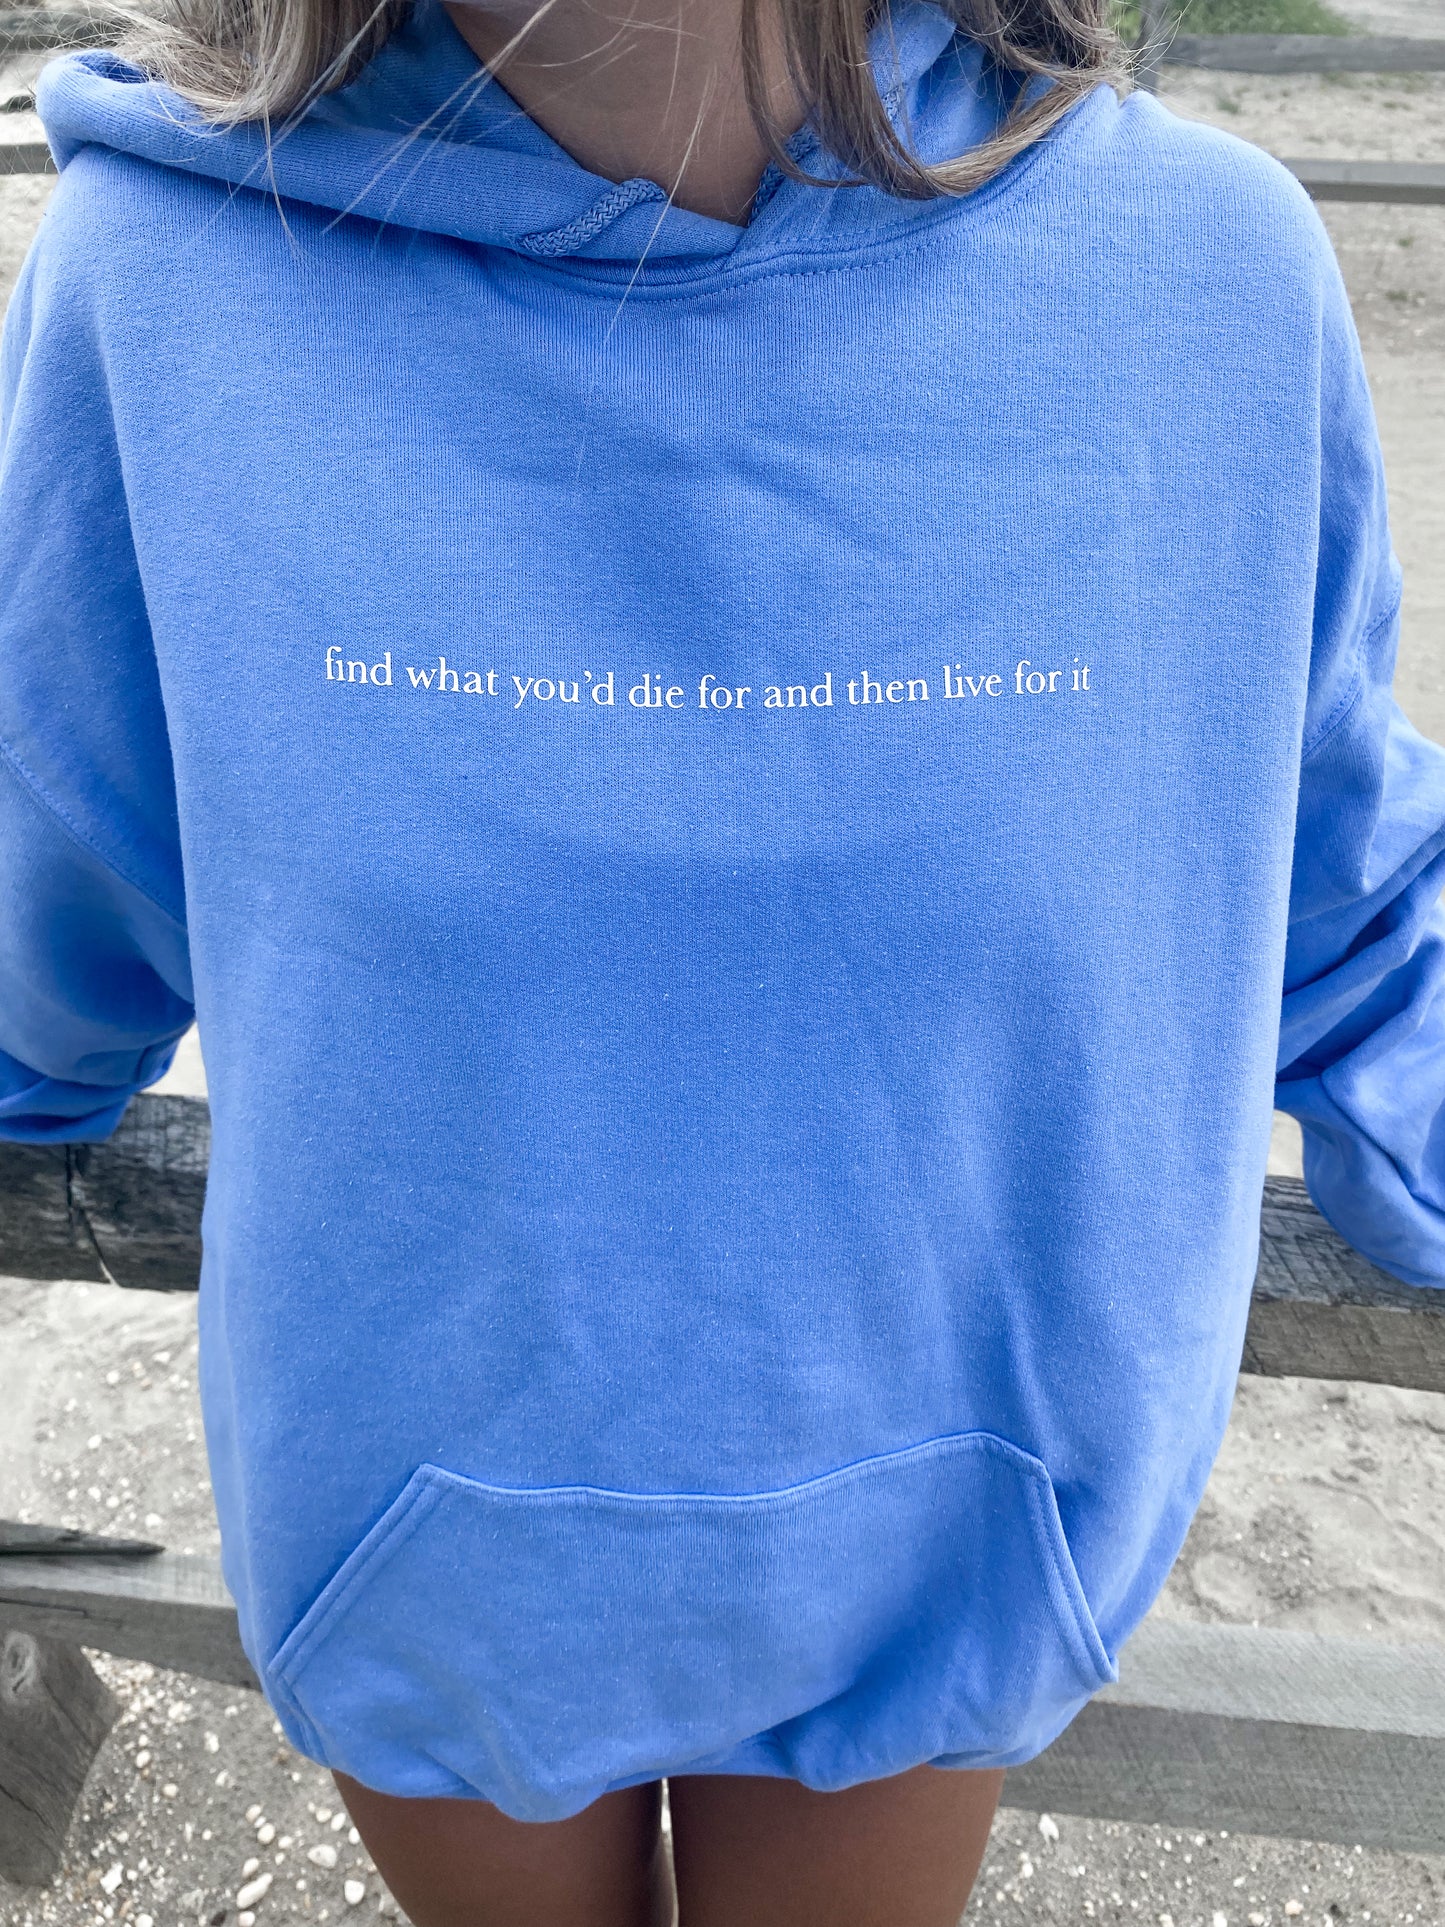 Find what you'd die for and then live for it sweatshirt